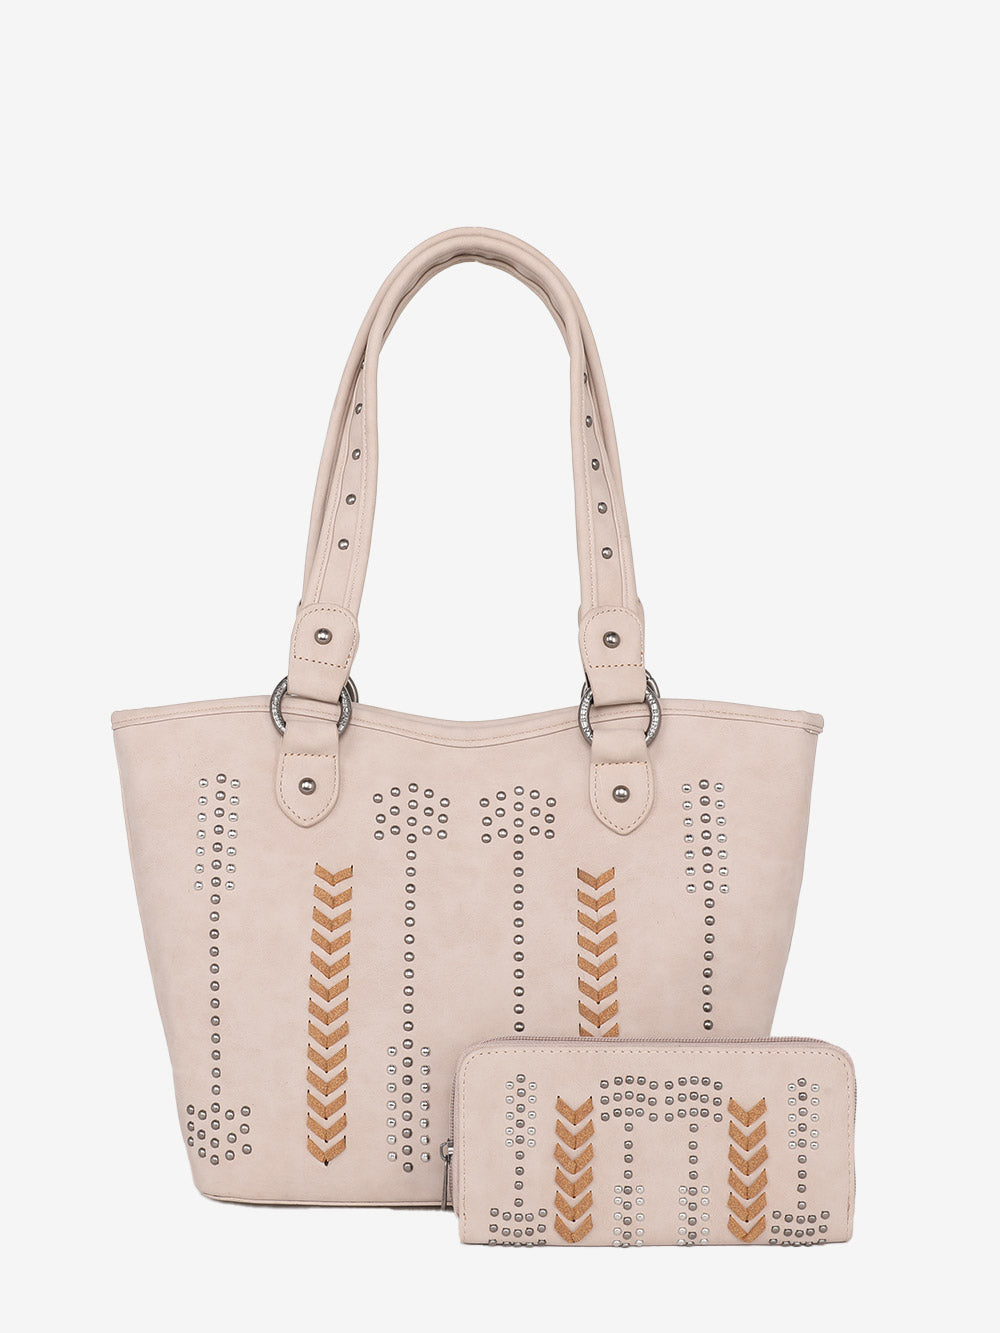 American Bling Beige Whipstitch Studs Tote Set - Montana West World